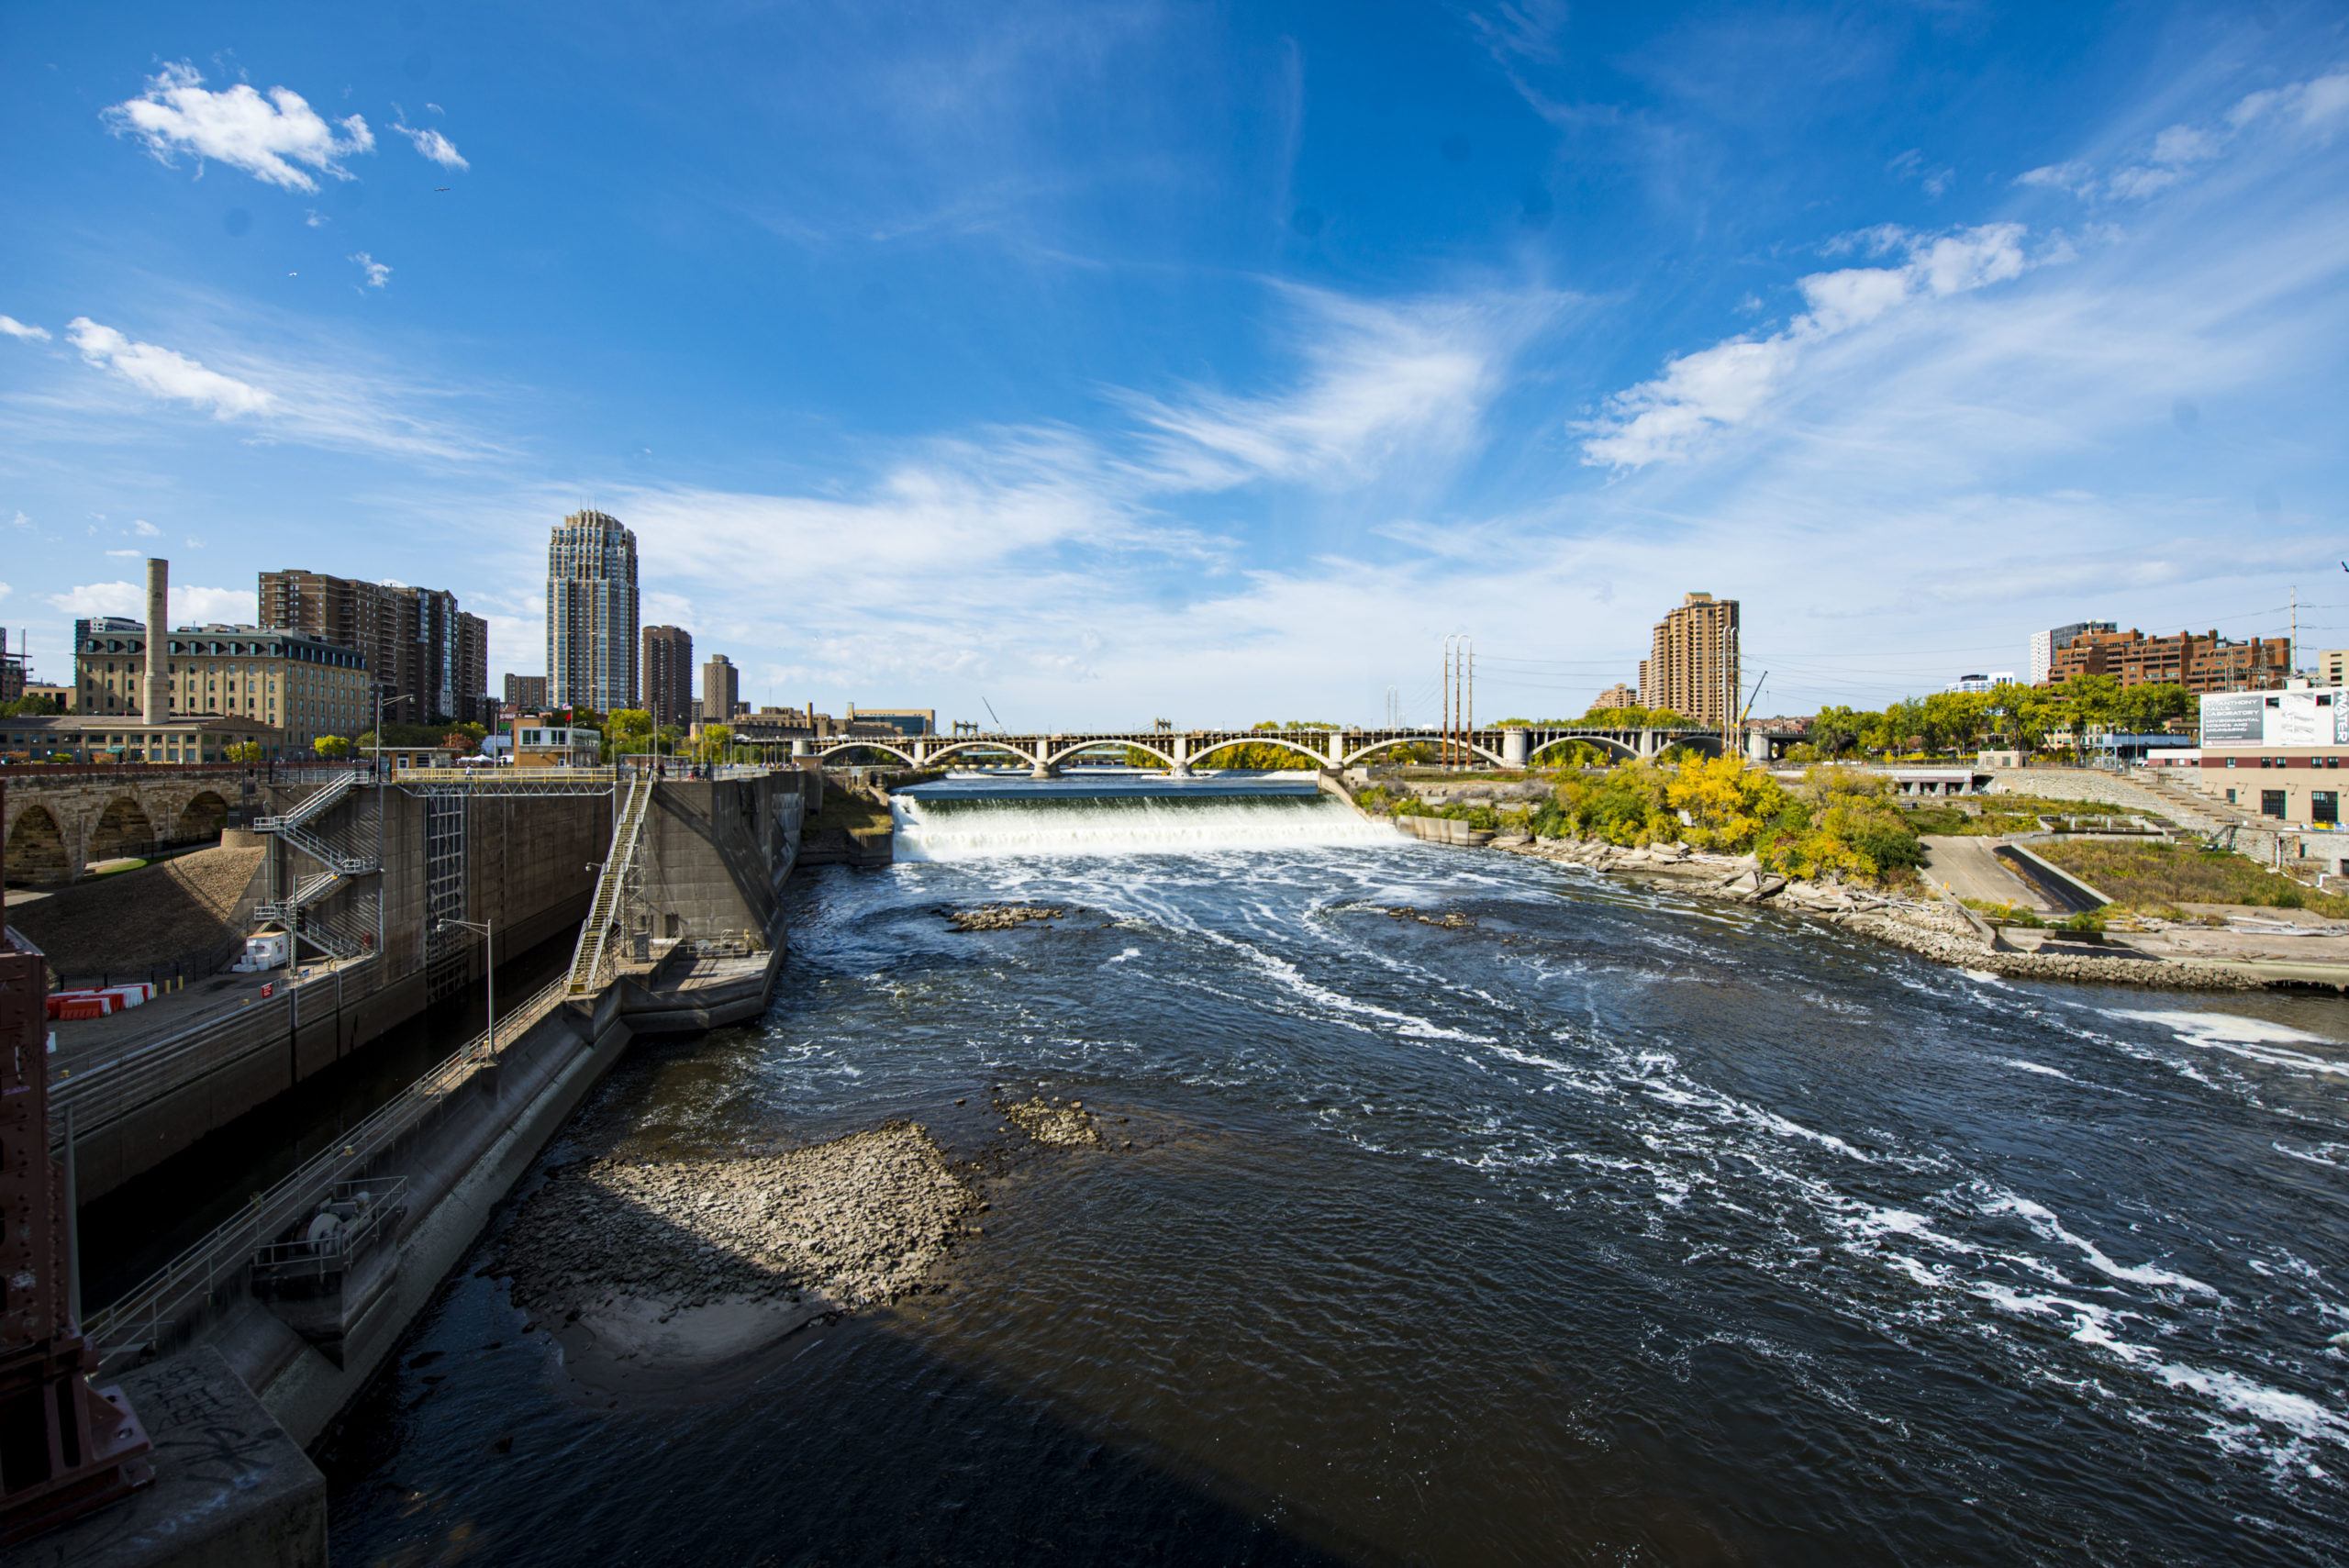 Friends of the Falls will negotiate City’s acquisition of federal land near St. Anthony Falls